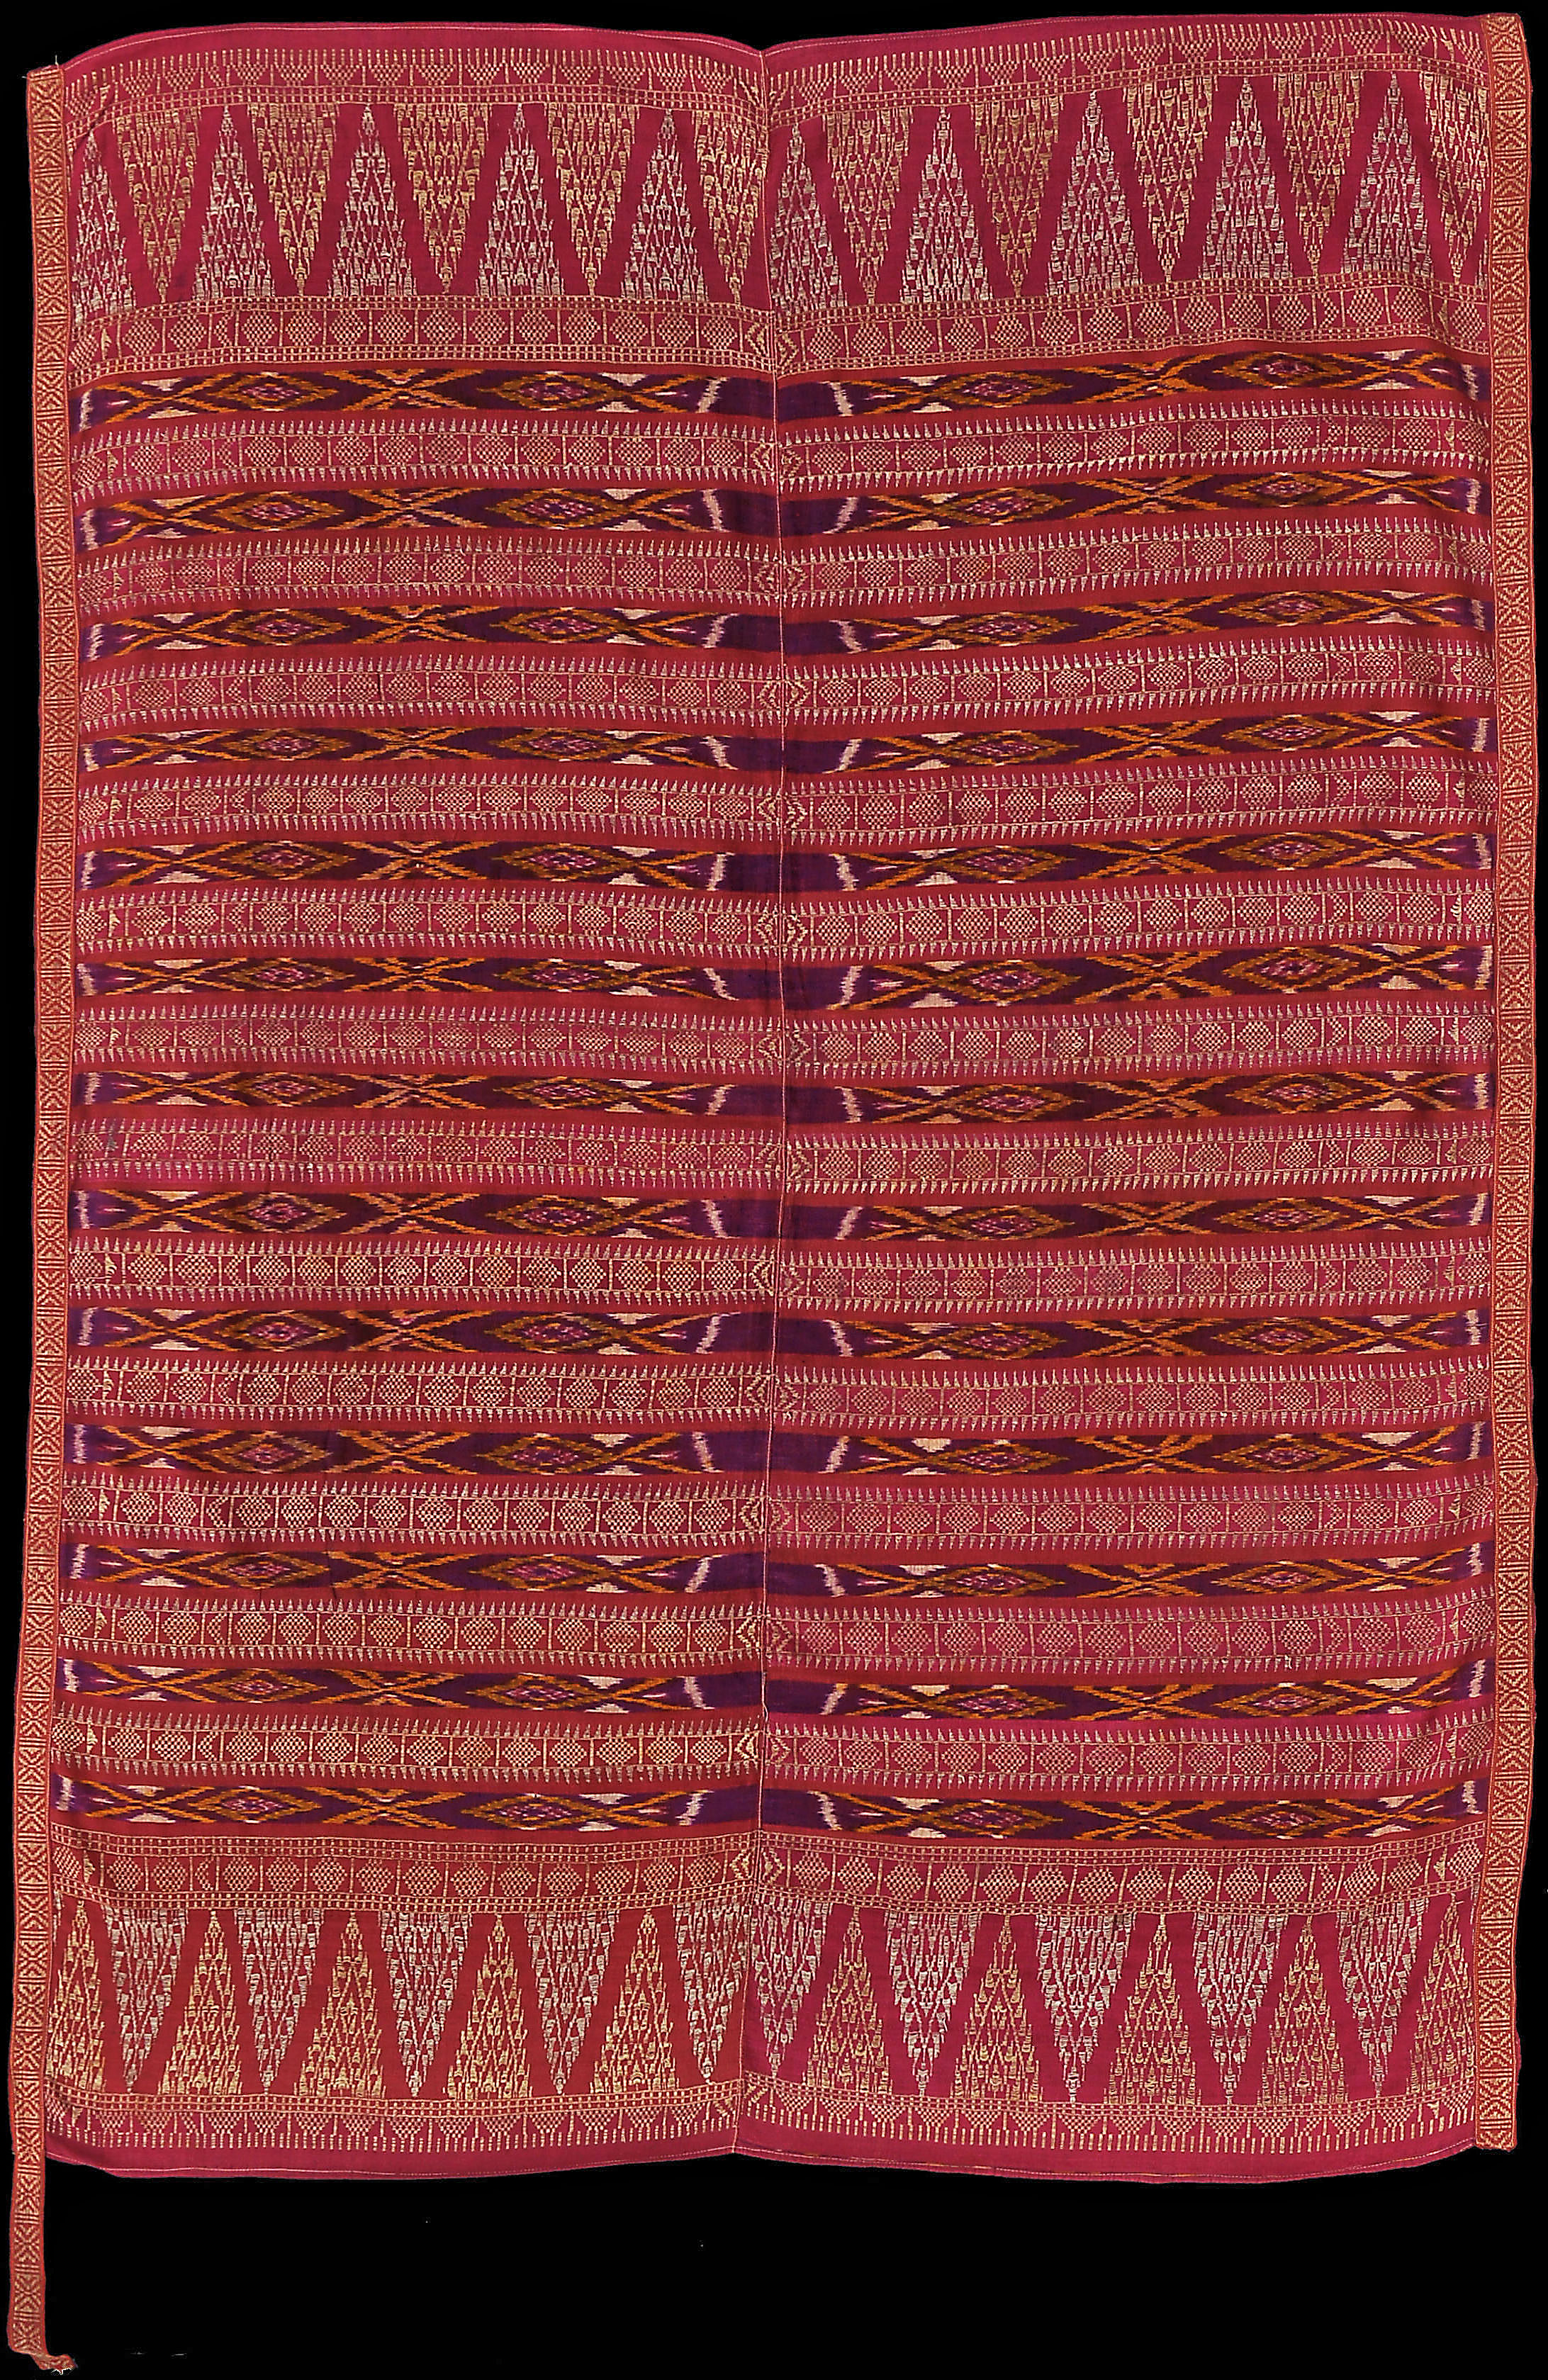 Ikat from Bali, Bali Group, Indonesia